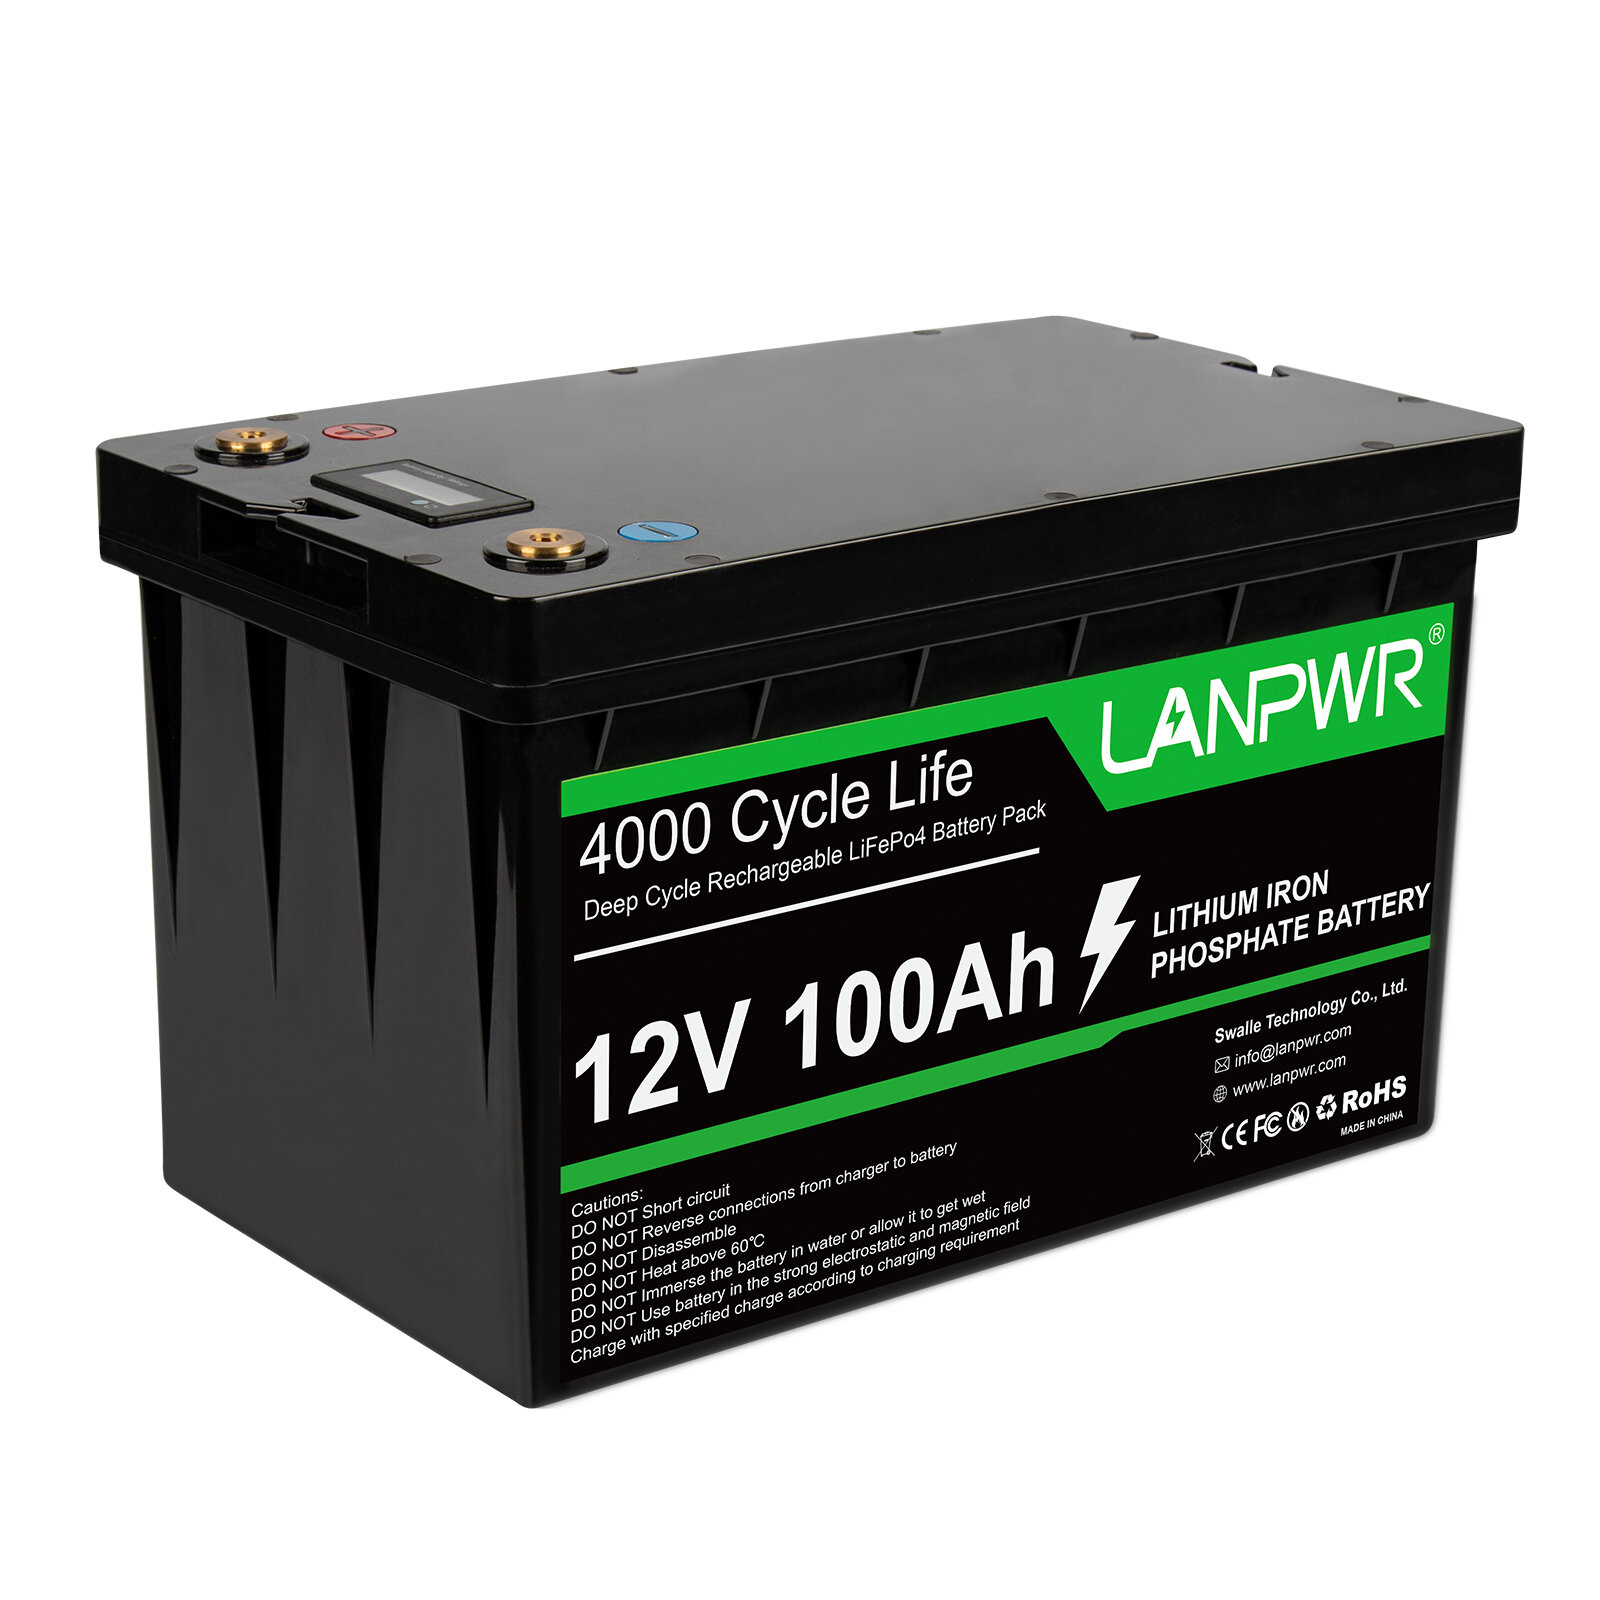 best price,lanpwr,12v,100ah,lifepo4,battery,pack,1280wh,eu,coupon,price,discount